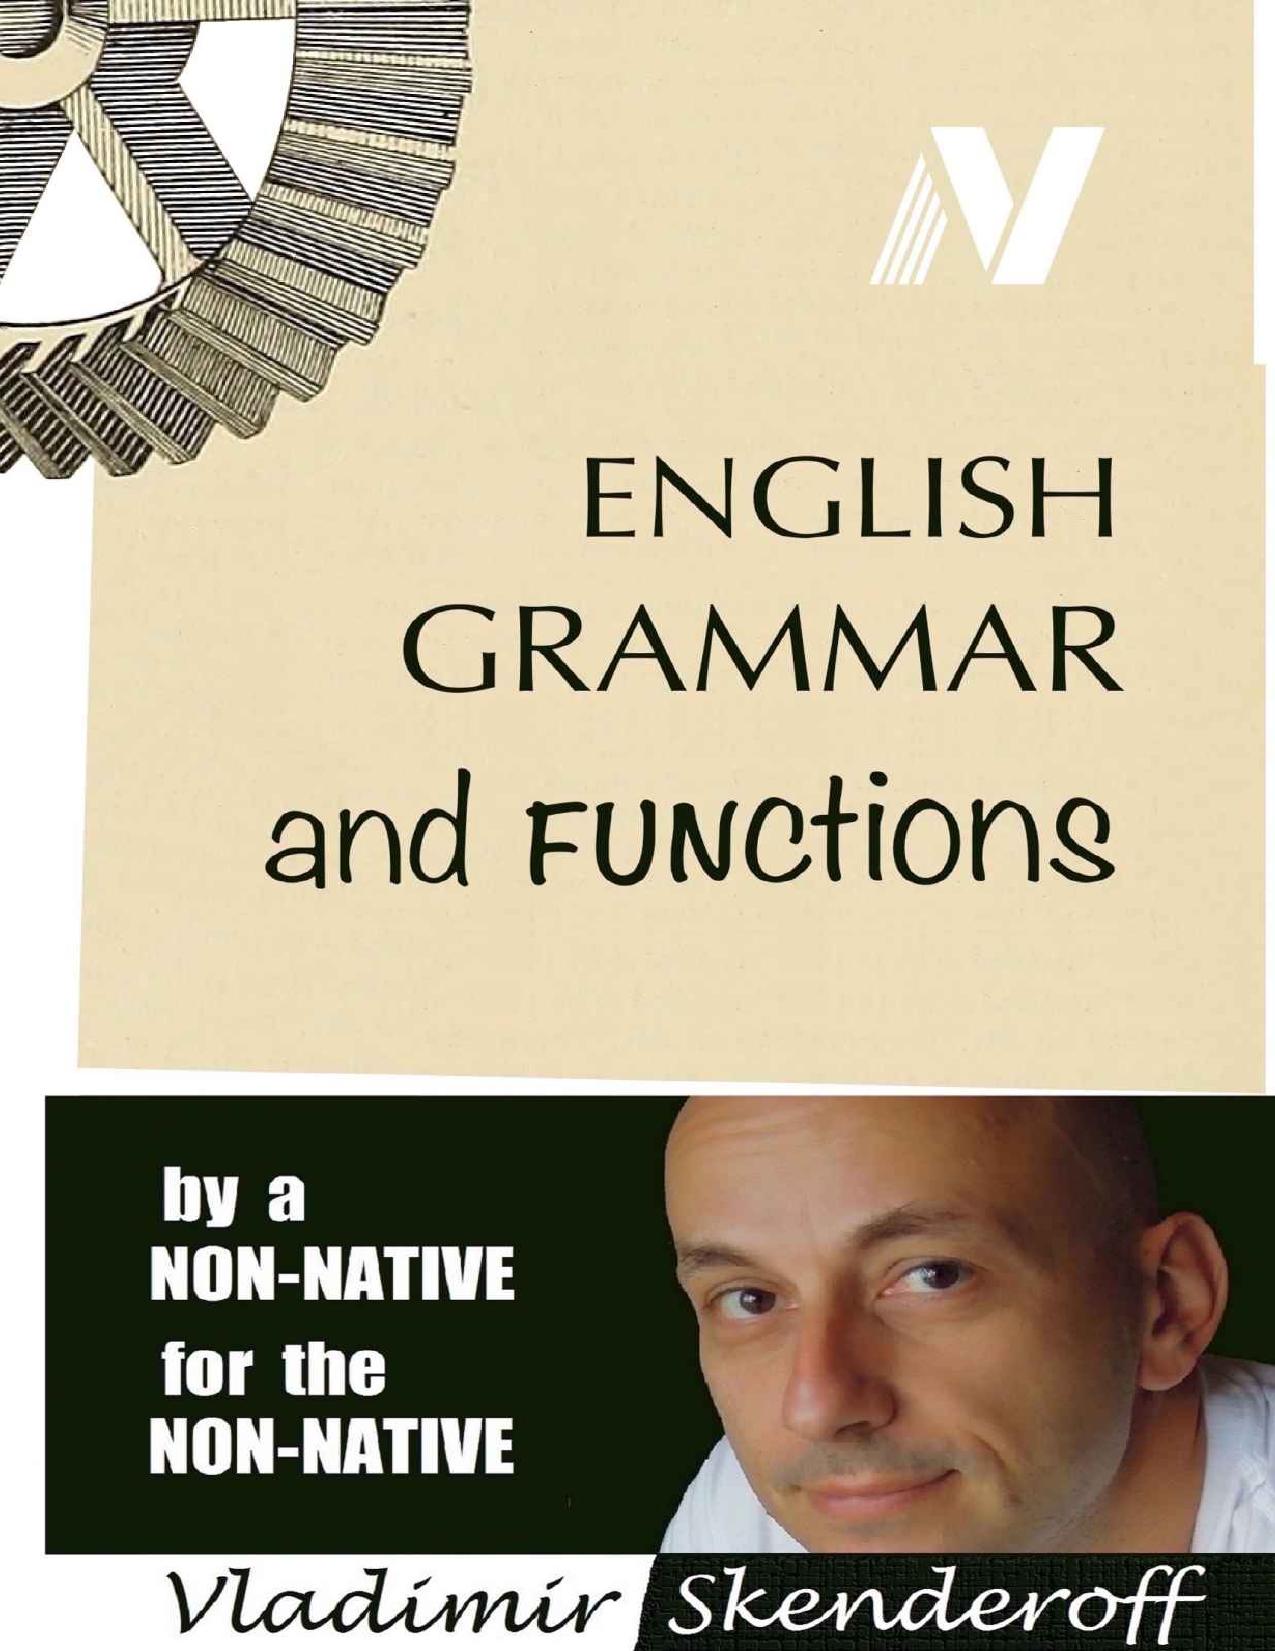 English Grammar and Functions: by a non-native, for the non-native by Vladimir Skenderoff